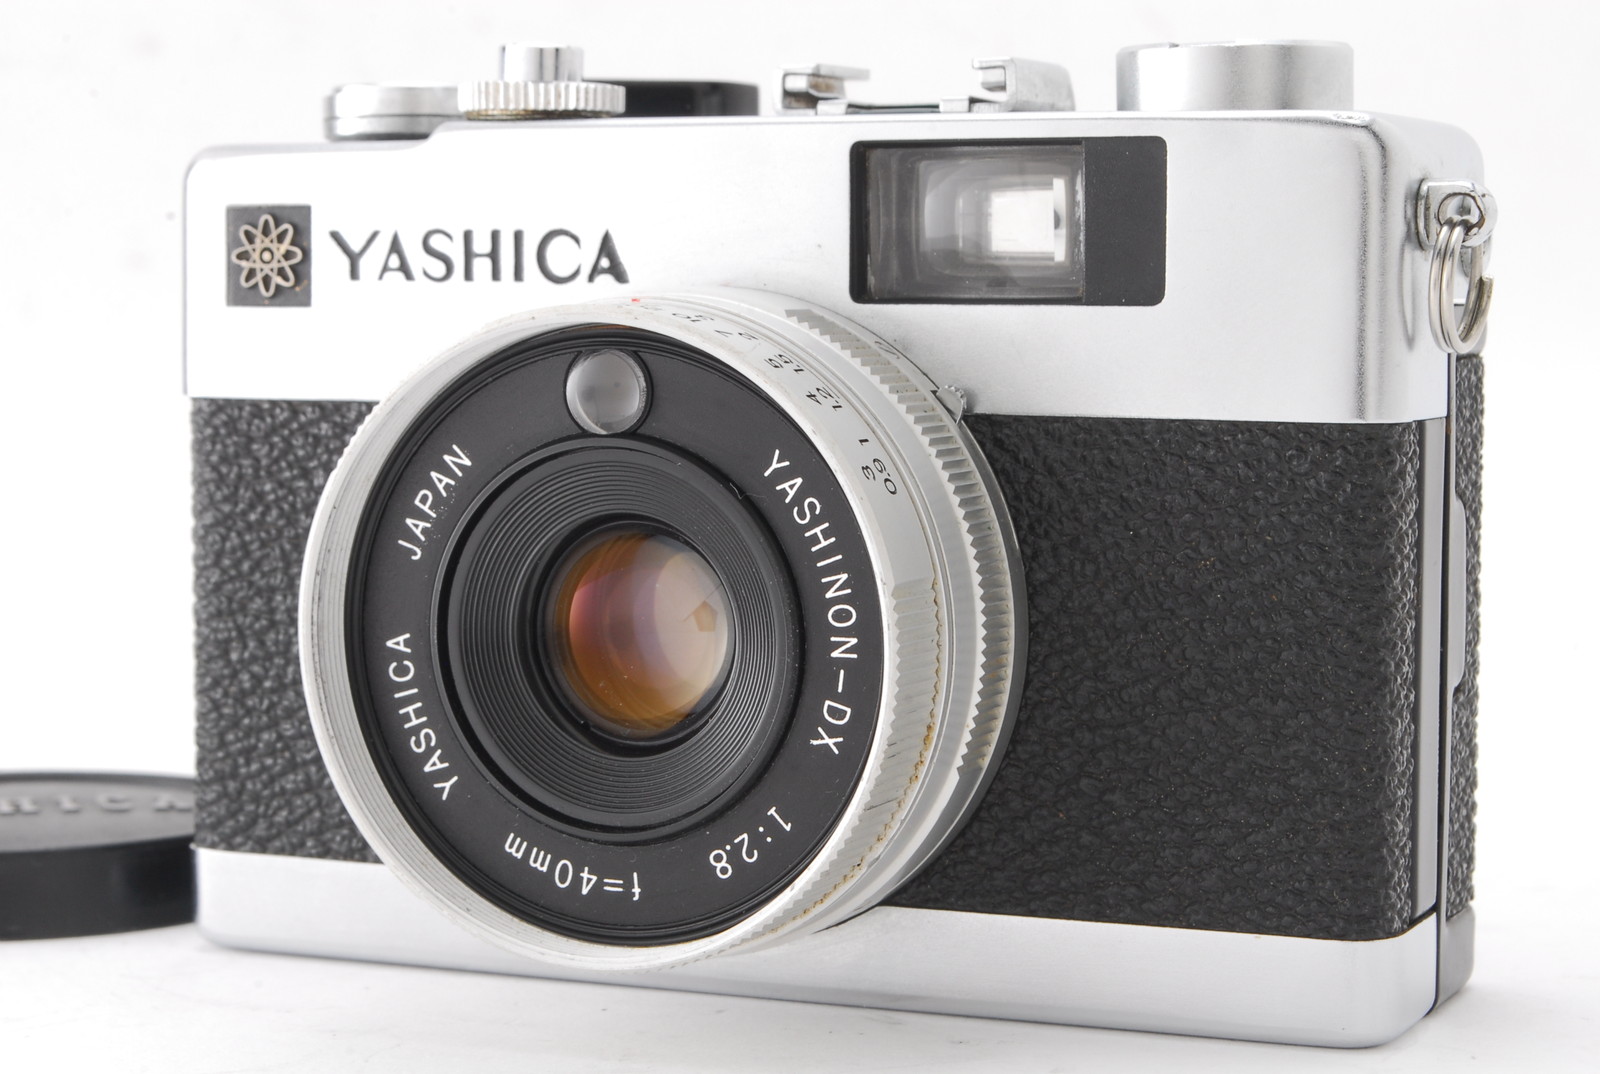 PROMOTION. APPEARANCE MINT Yashica Electro 35 MC YASHINON DX 40mm f/2.8, Front Cap from Japan